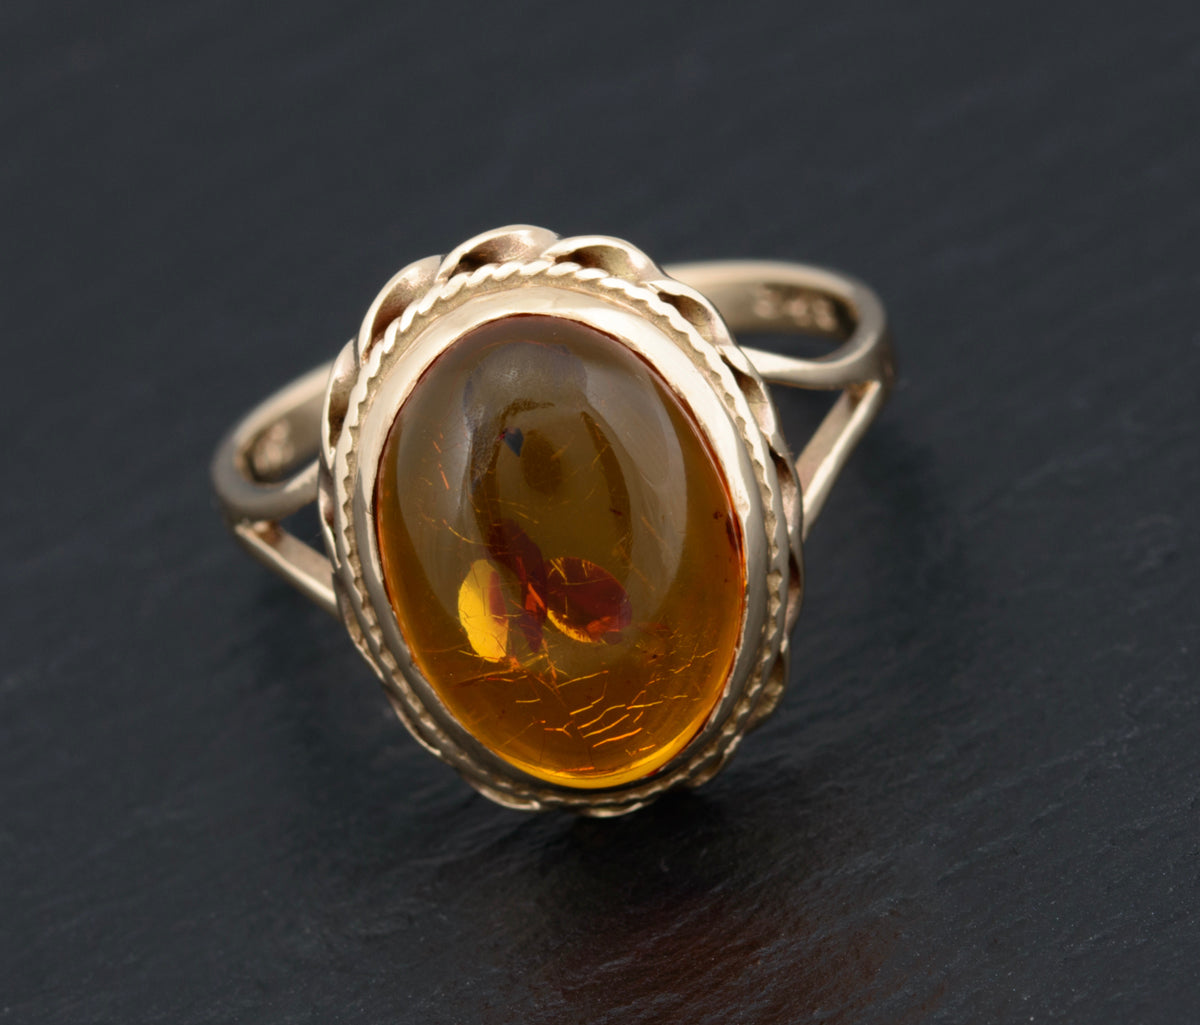 Vintage 9ct Yellow Gold Ring With Polished Amber Cabochon 1960's Retro (A1467)